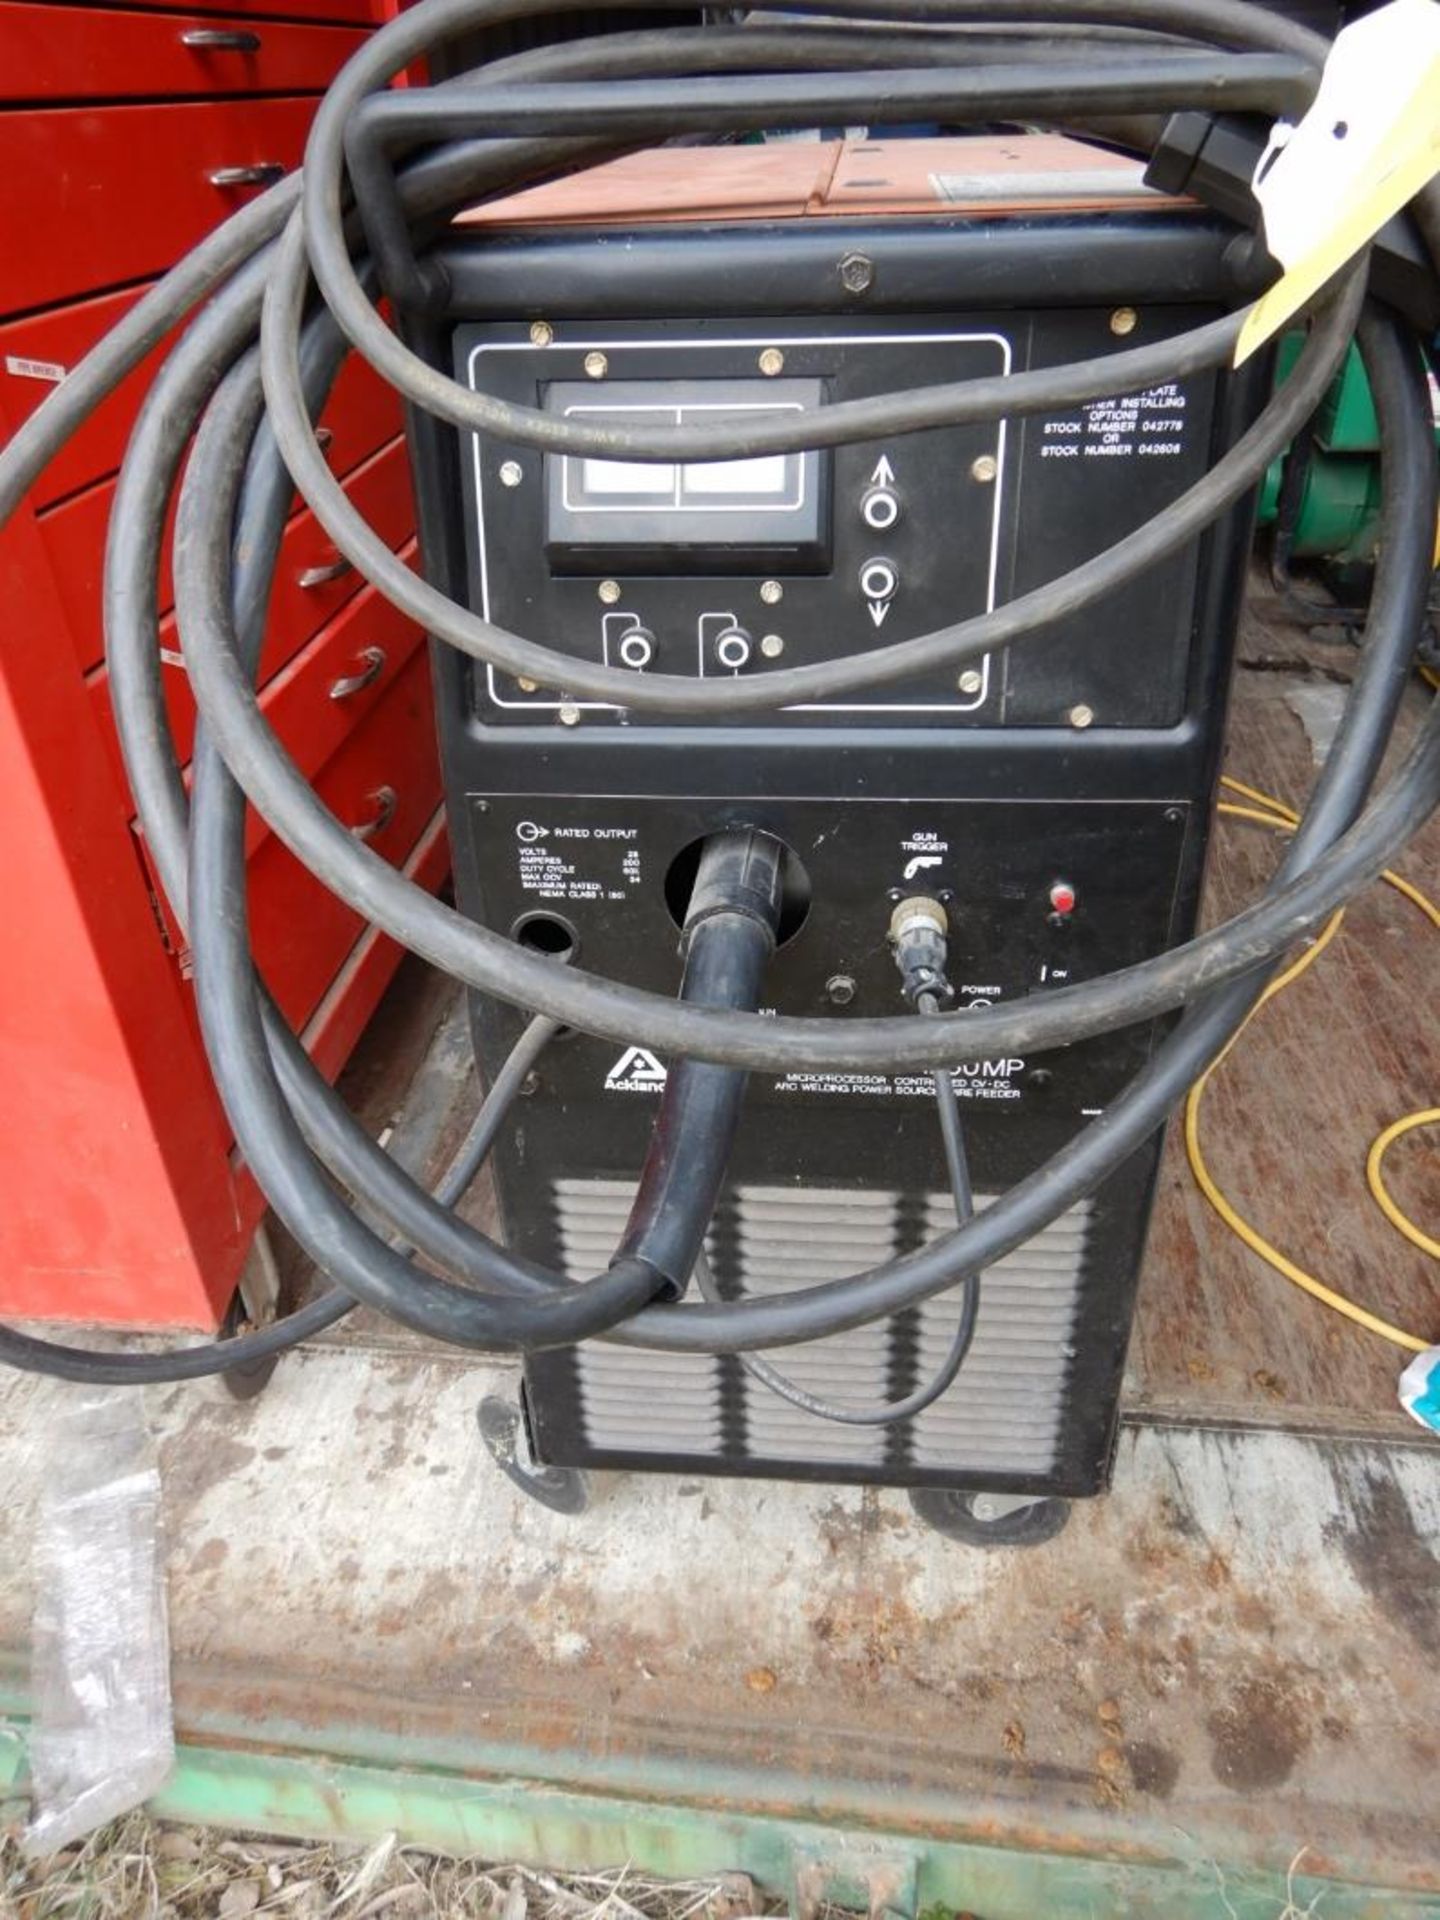 ACKLANDS AK-MATIC 1250MP MIG WELDER C/W GAS BOTTLE AND CABLES - Image 3 of 5